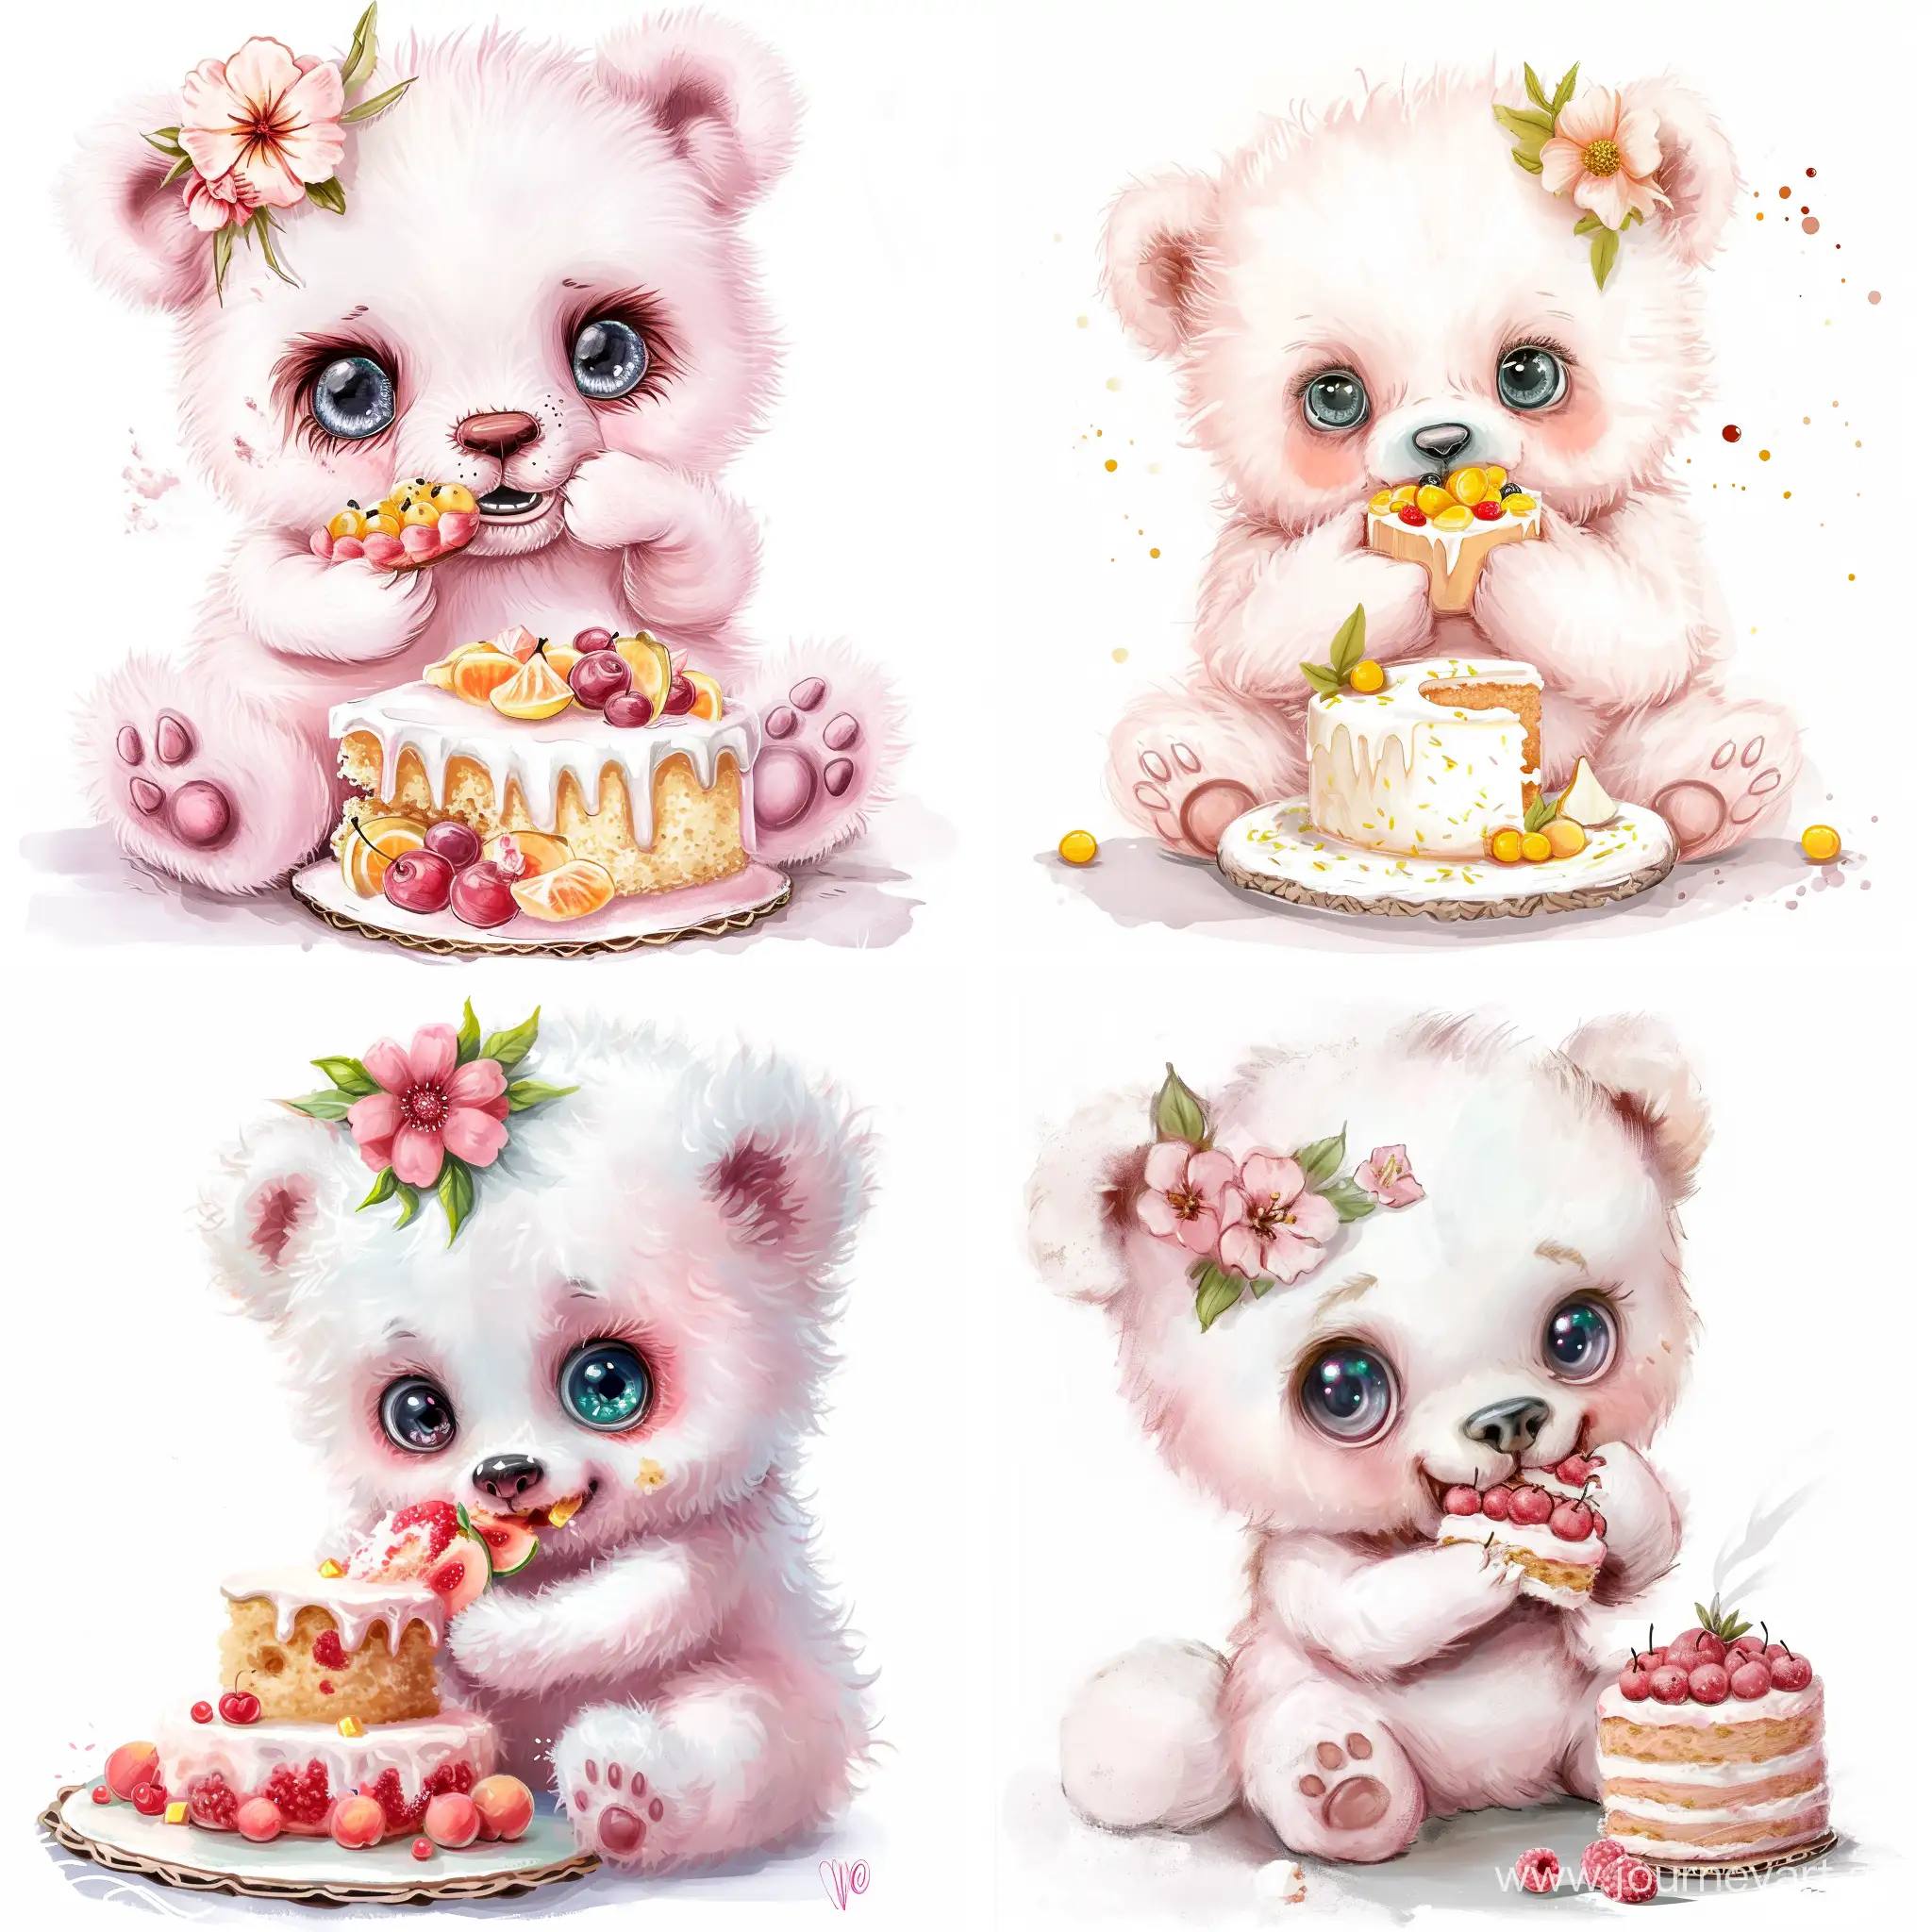 Cute illustration of adorable white pink bear with flower ornament on the head eating big fruits cake, full body, big almond eyes, brilliante eyes, fluffy, whimsical, boho, nursery style, pastel colors,  soft colors, clean colors, 2D, solid white background, realistic, detailed, baby book illustration